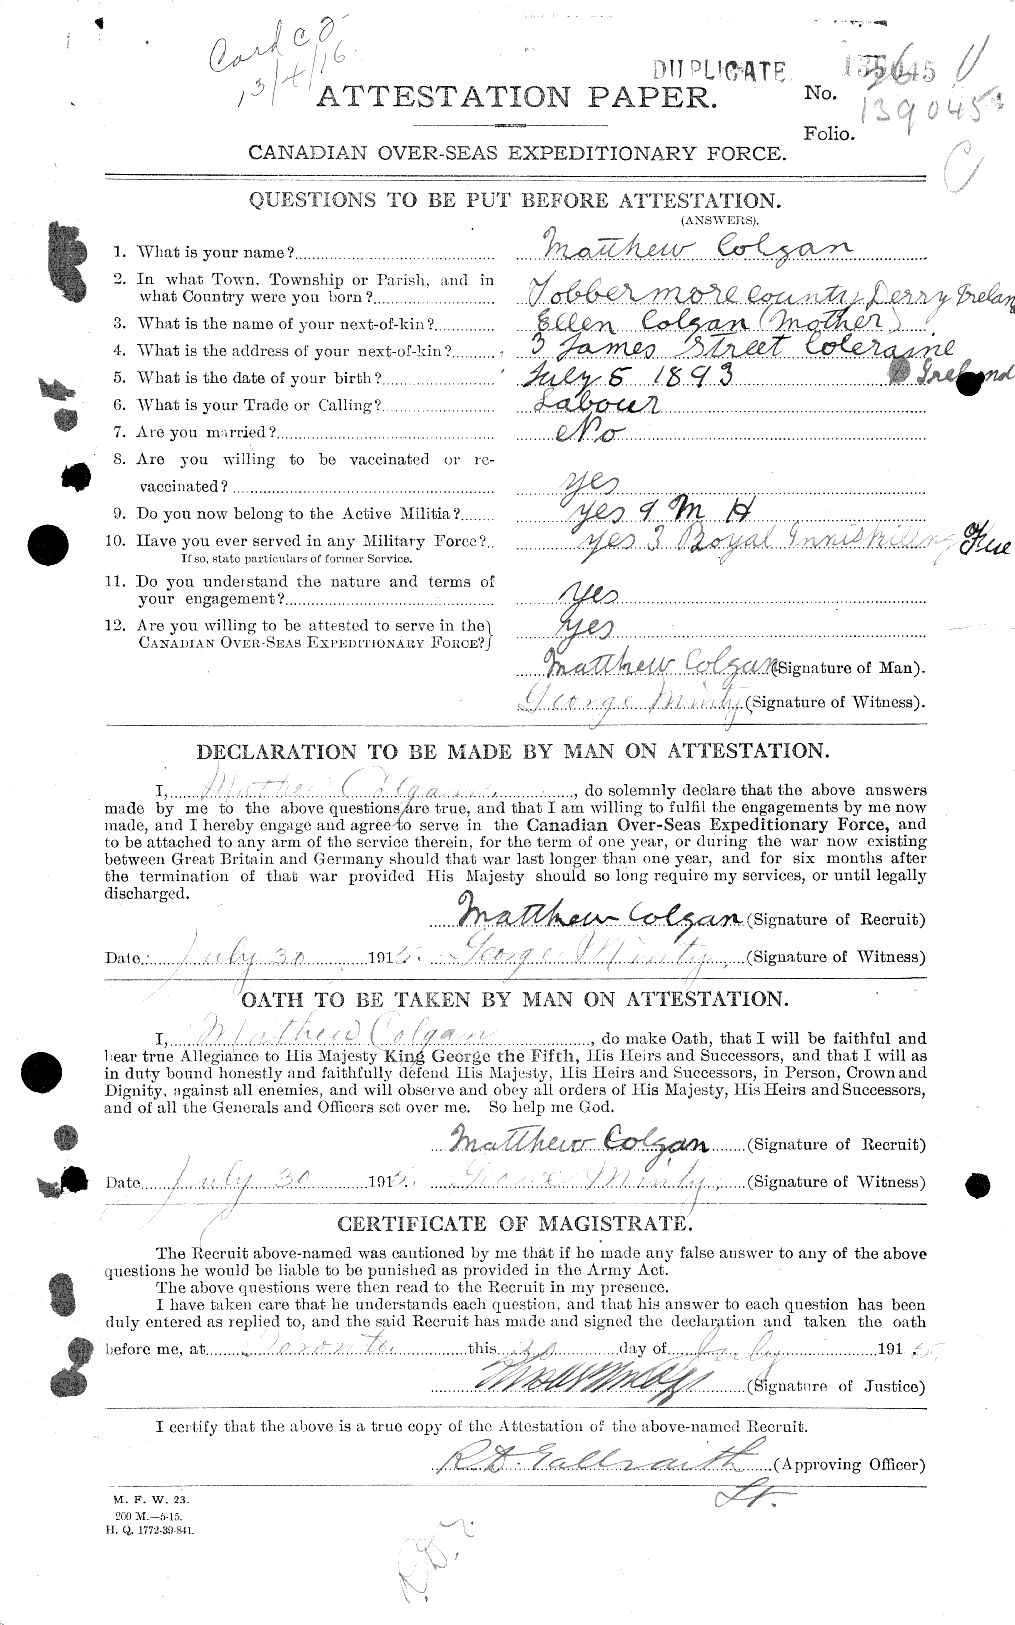 Personnel Records of the First World War - CEF 028482a